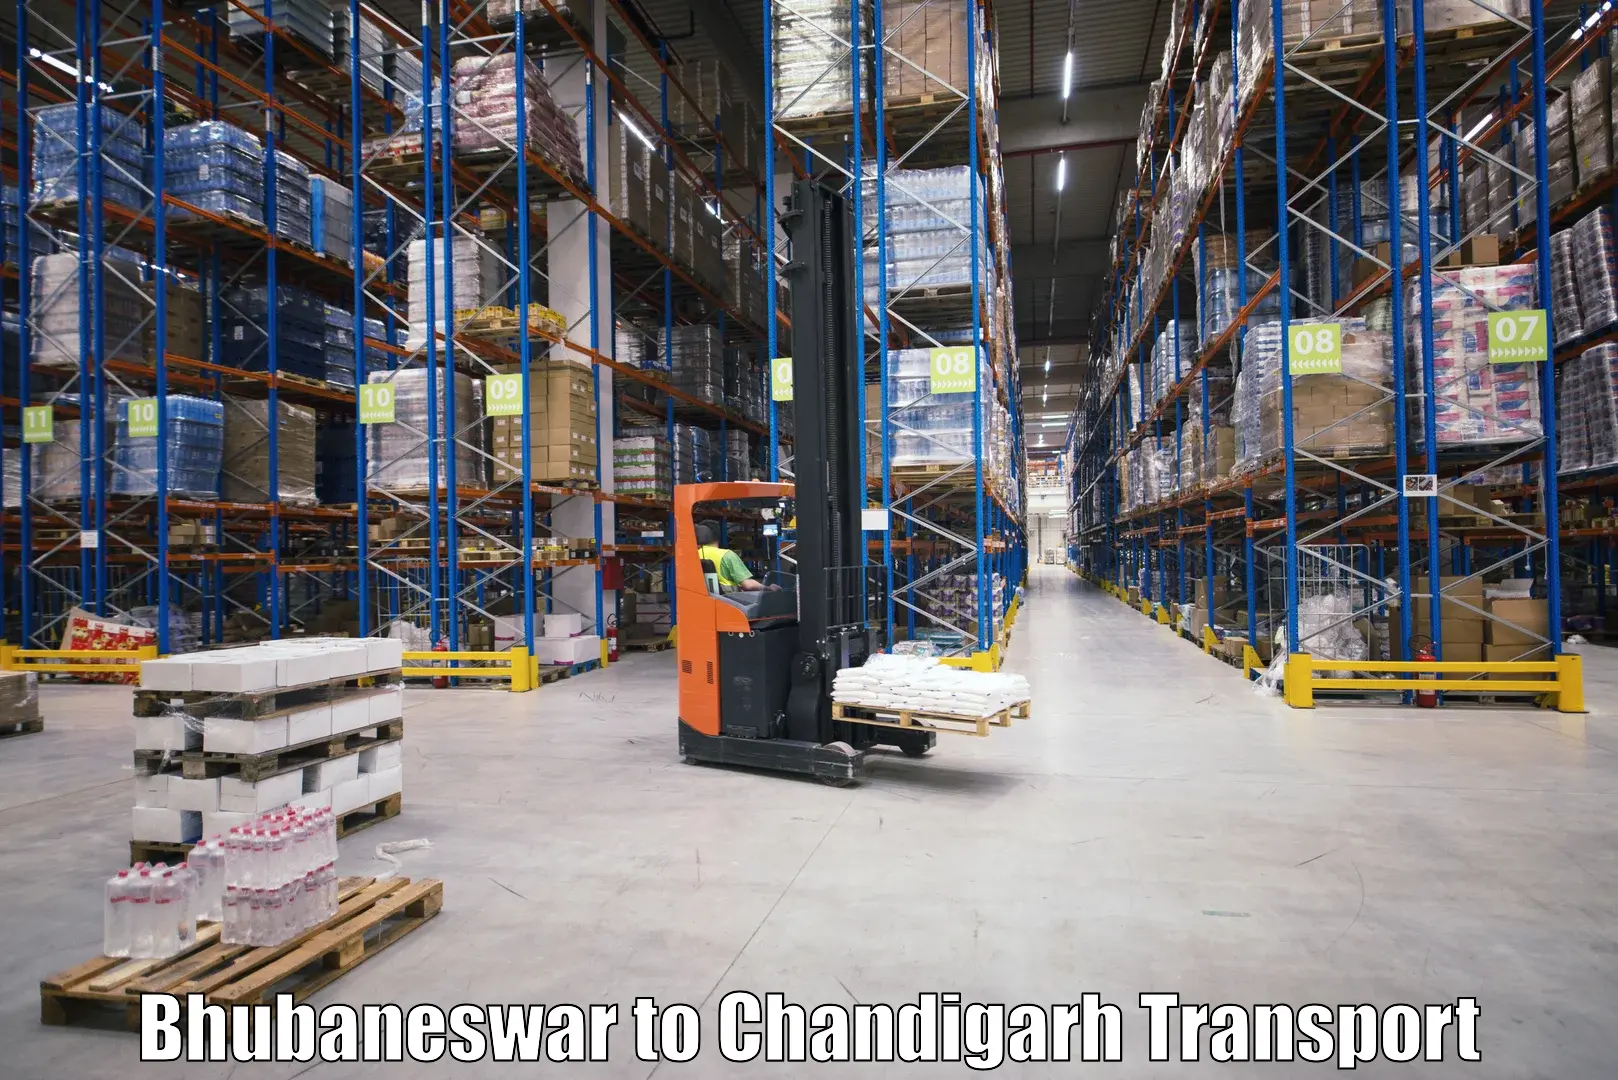 Transport bike from one state to another Bhubaneswar to Chandigarh